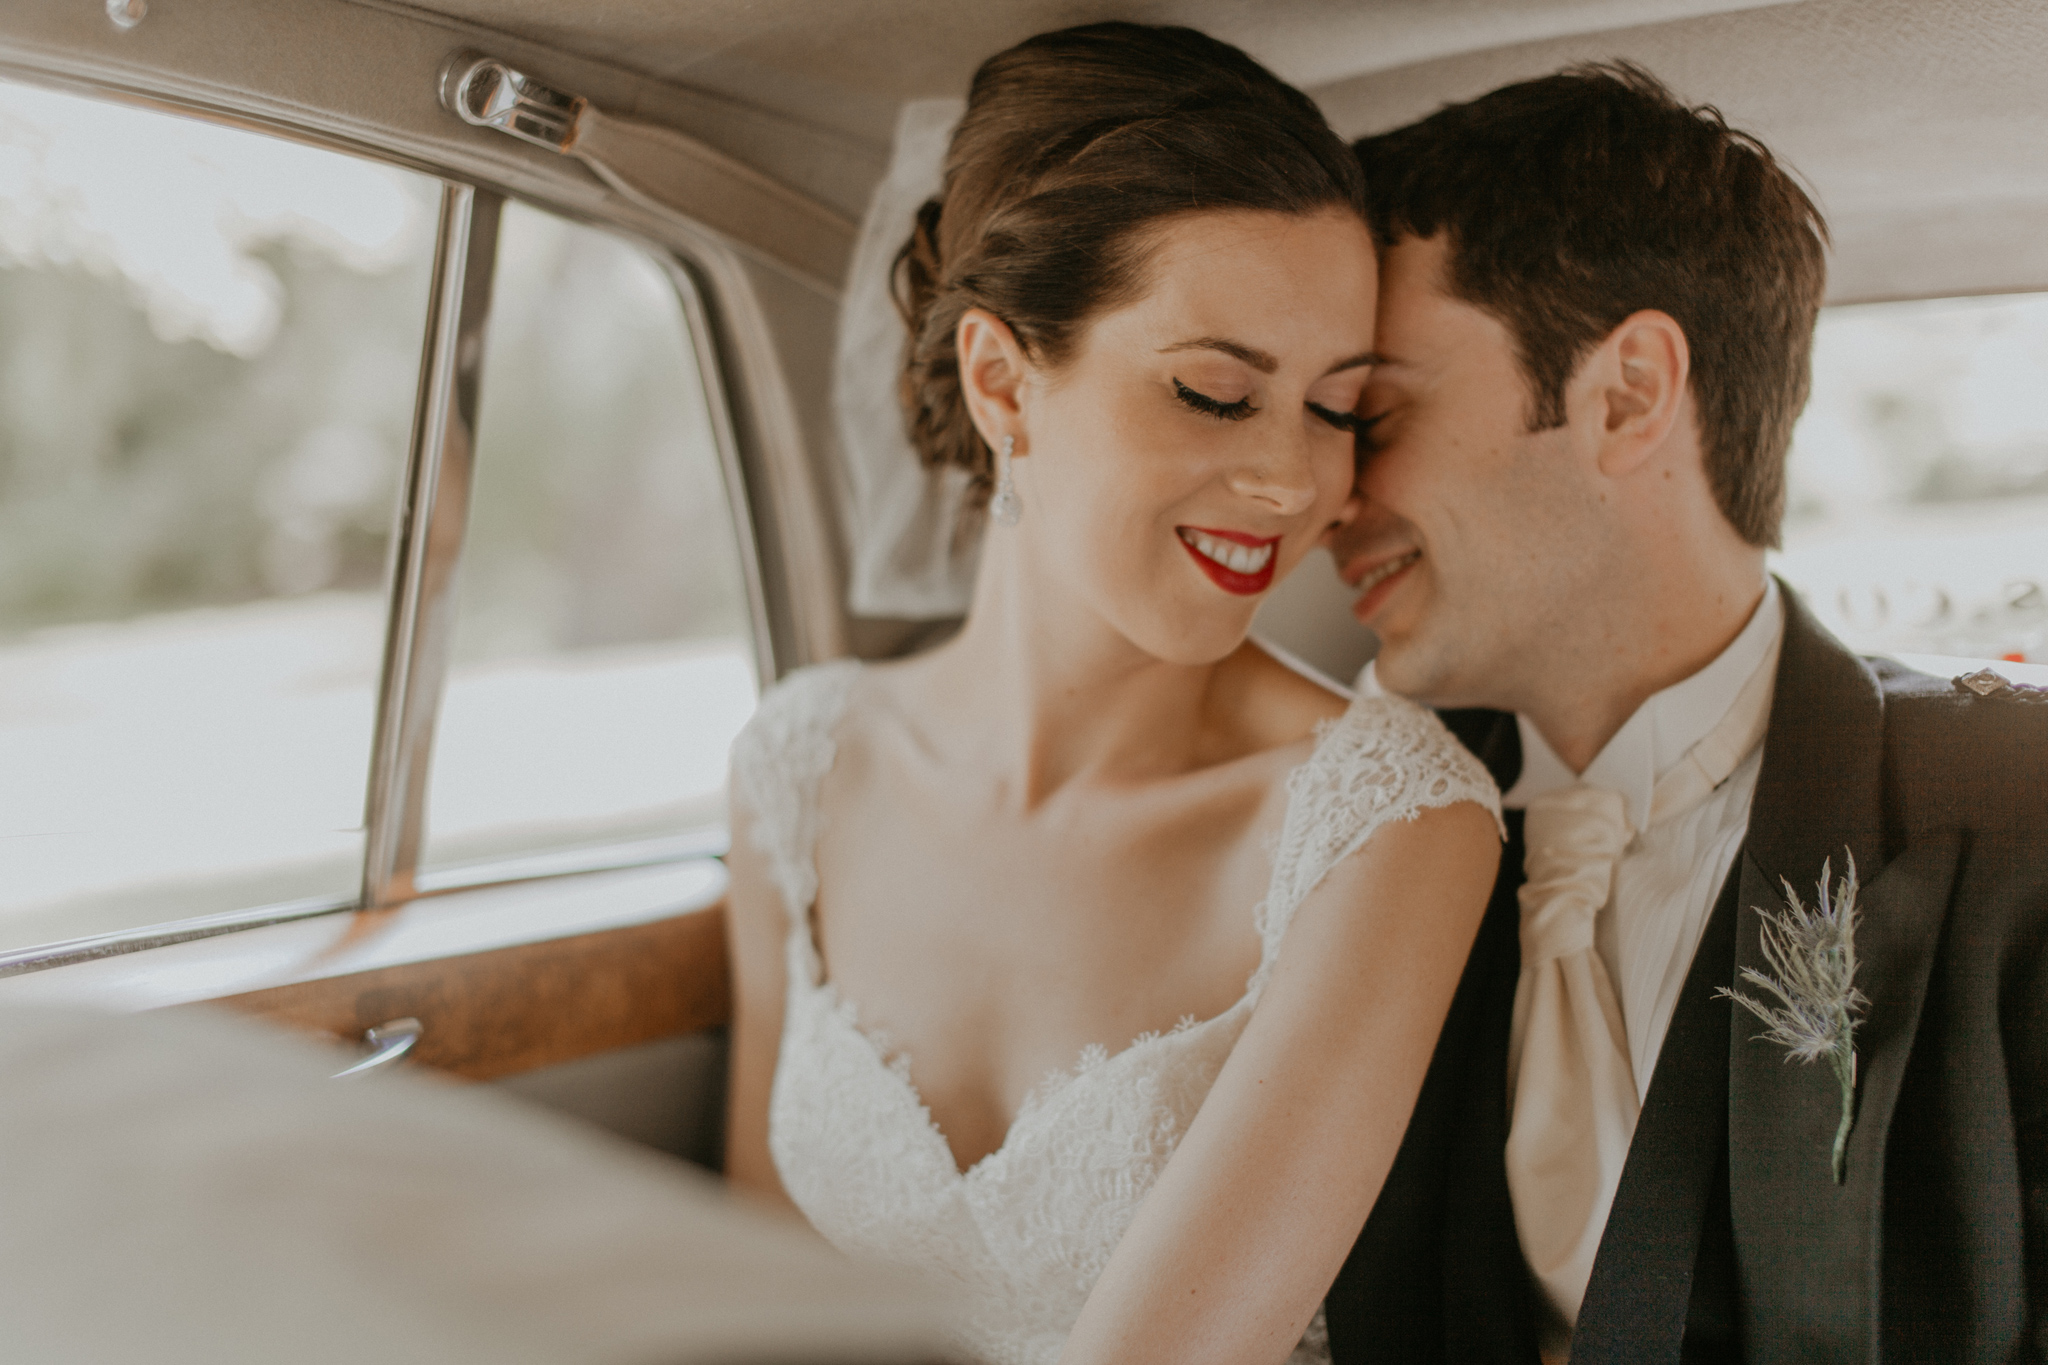 Bride and groom romantic photo in car on wedding day